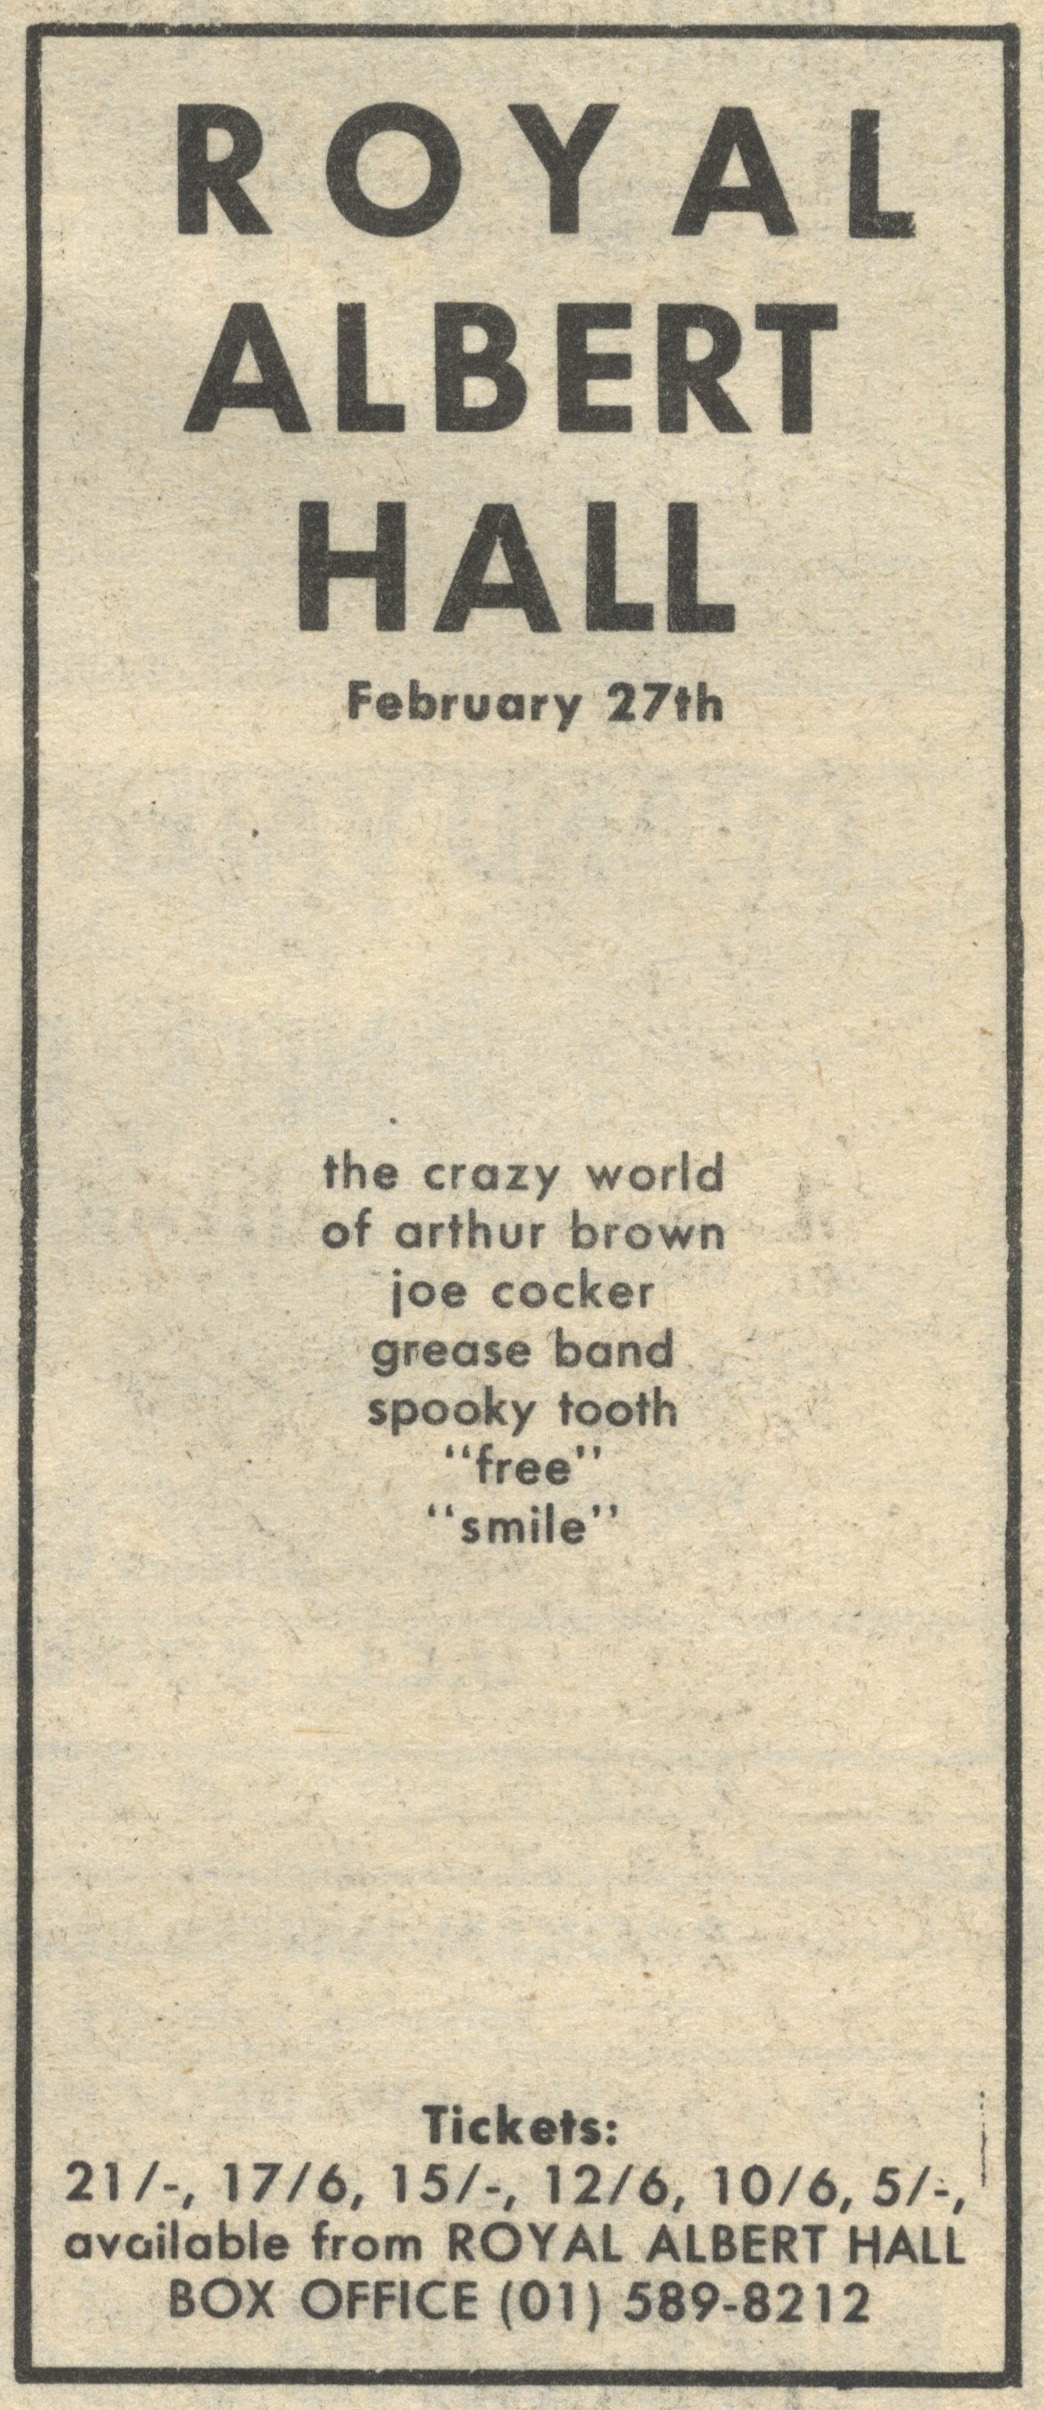 Smile in London on 27.02.1969